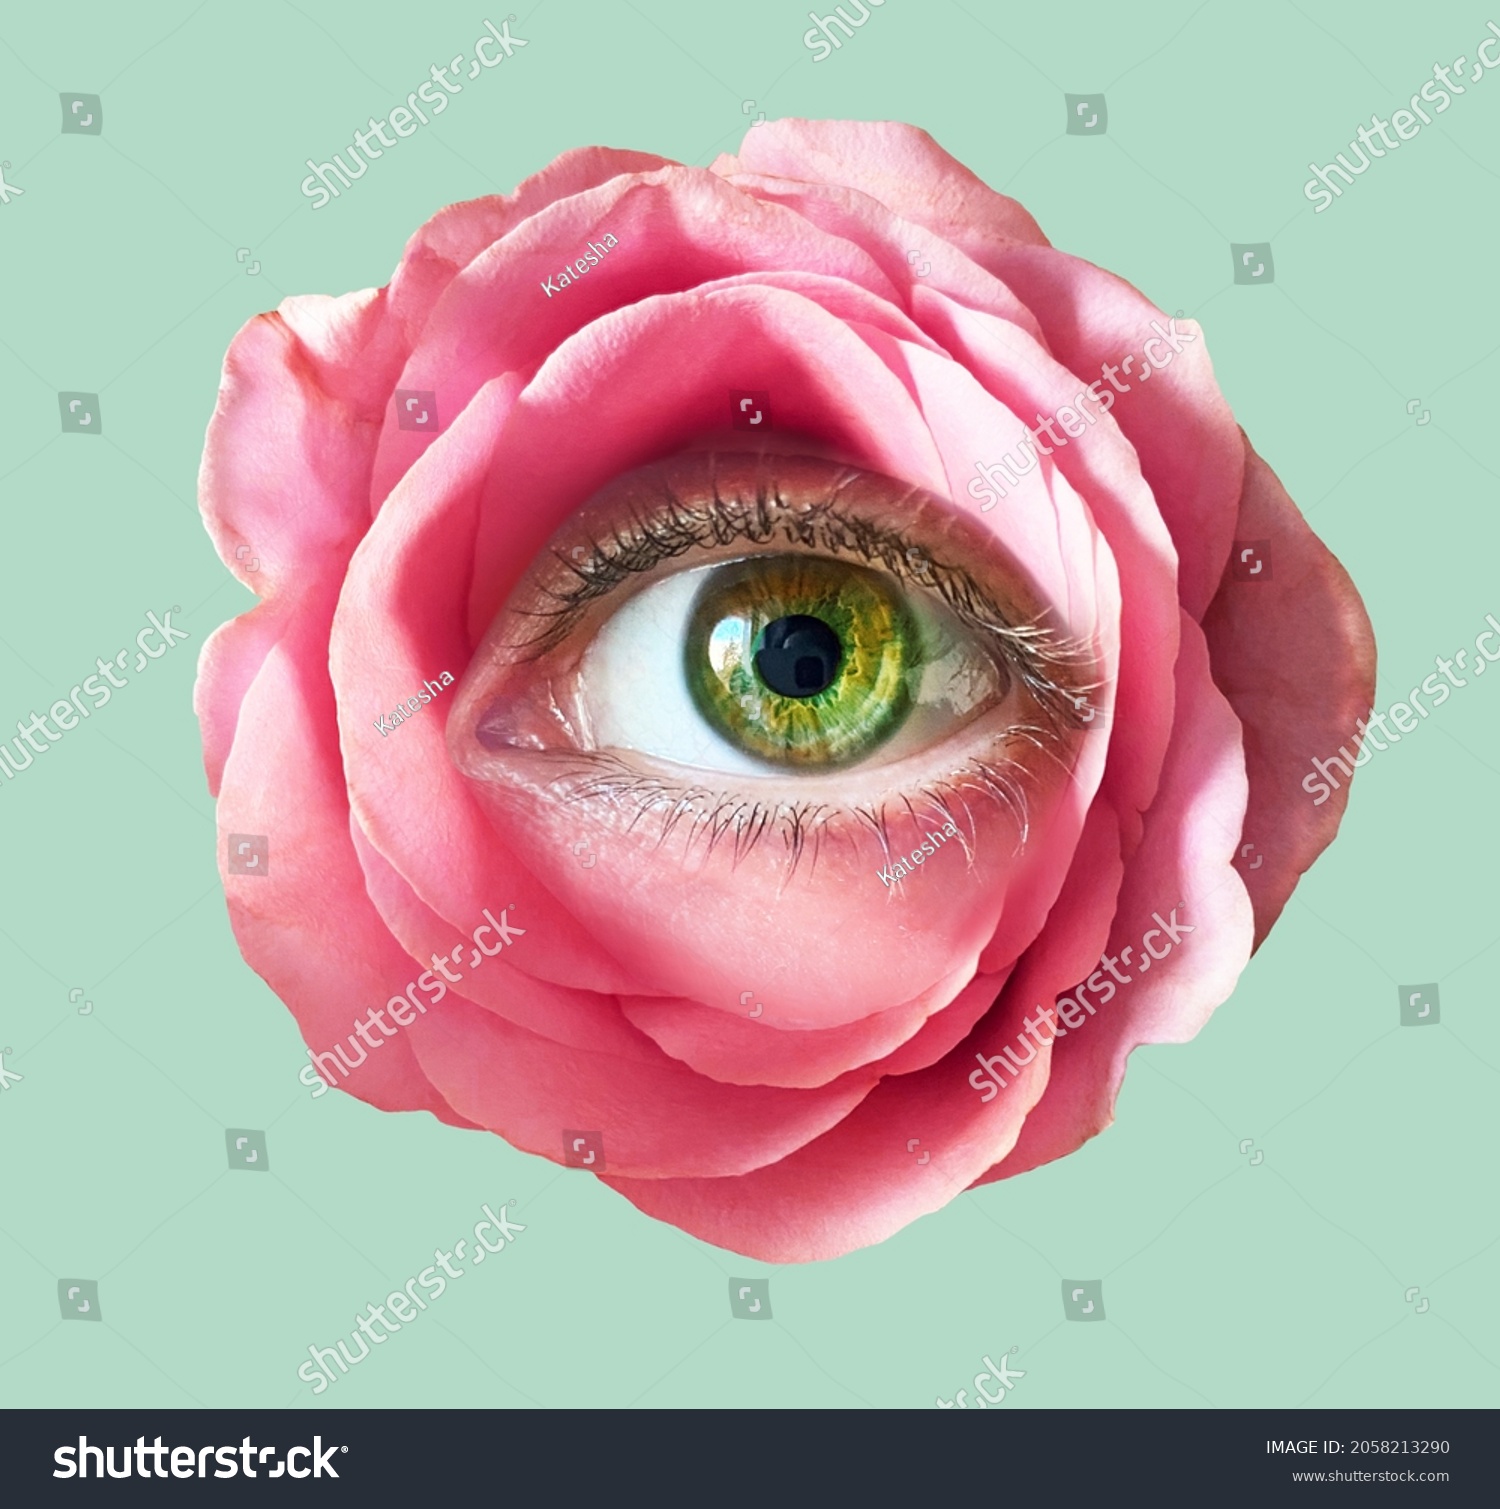 Contemporary art collage. Romantic flowers roses eye. Eyeball in flower.Modern conceptual art poster with a rose with beautiful green 
eye in a mas surrealism style. #2058213290